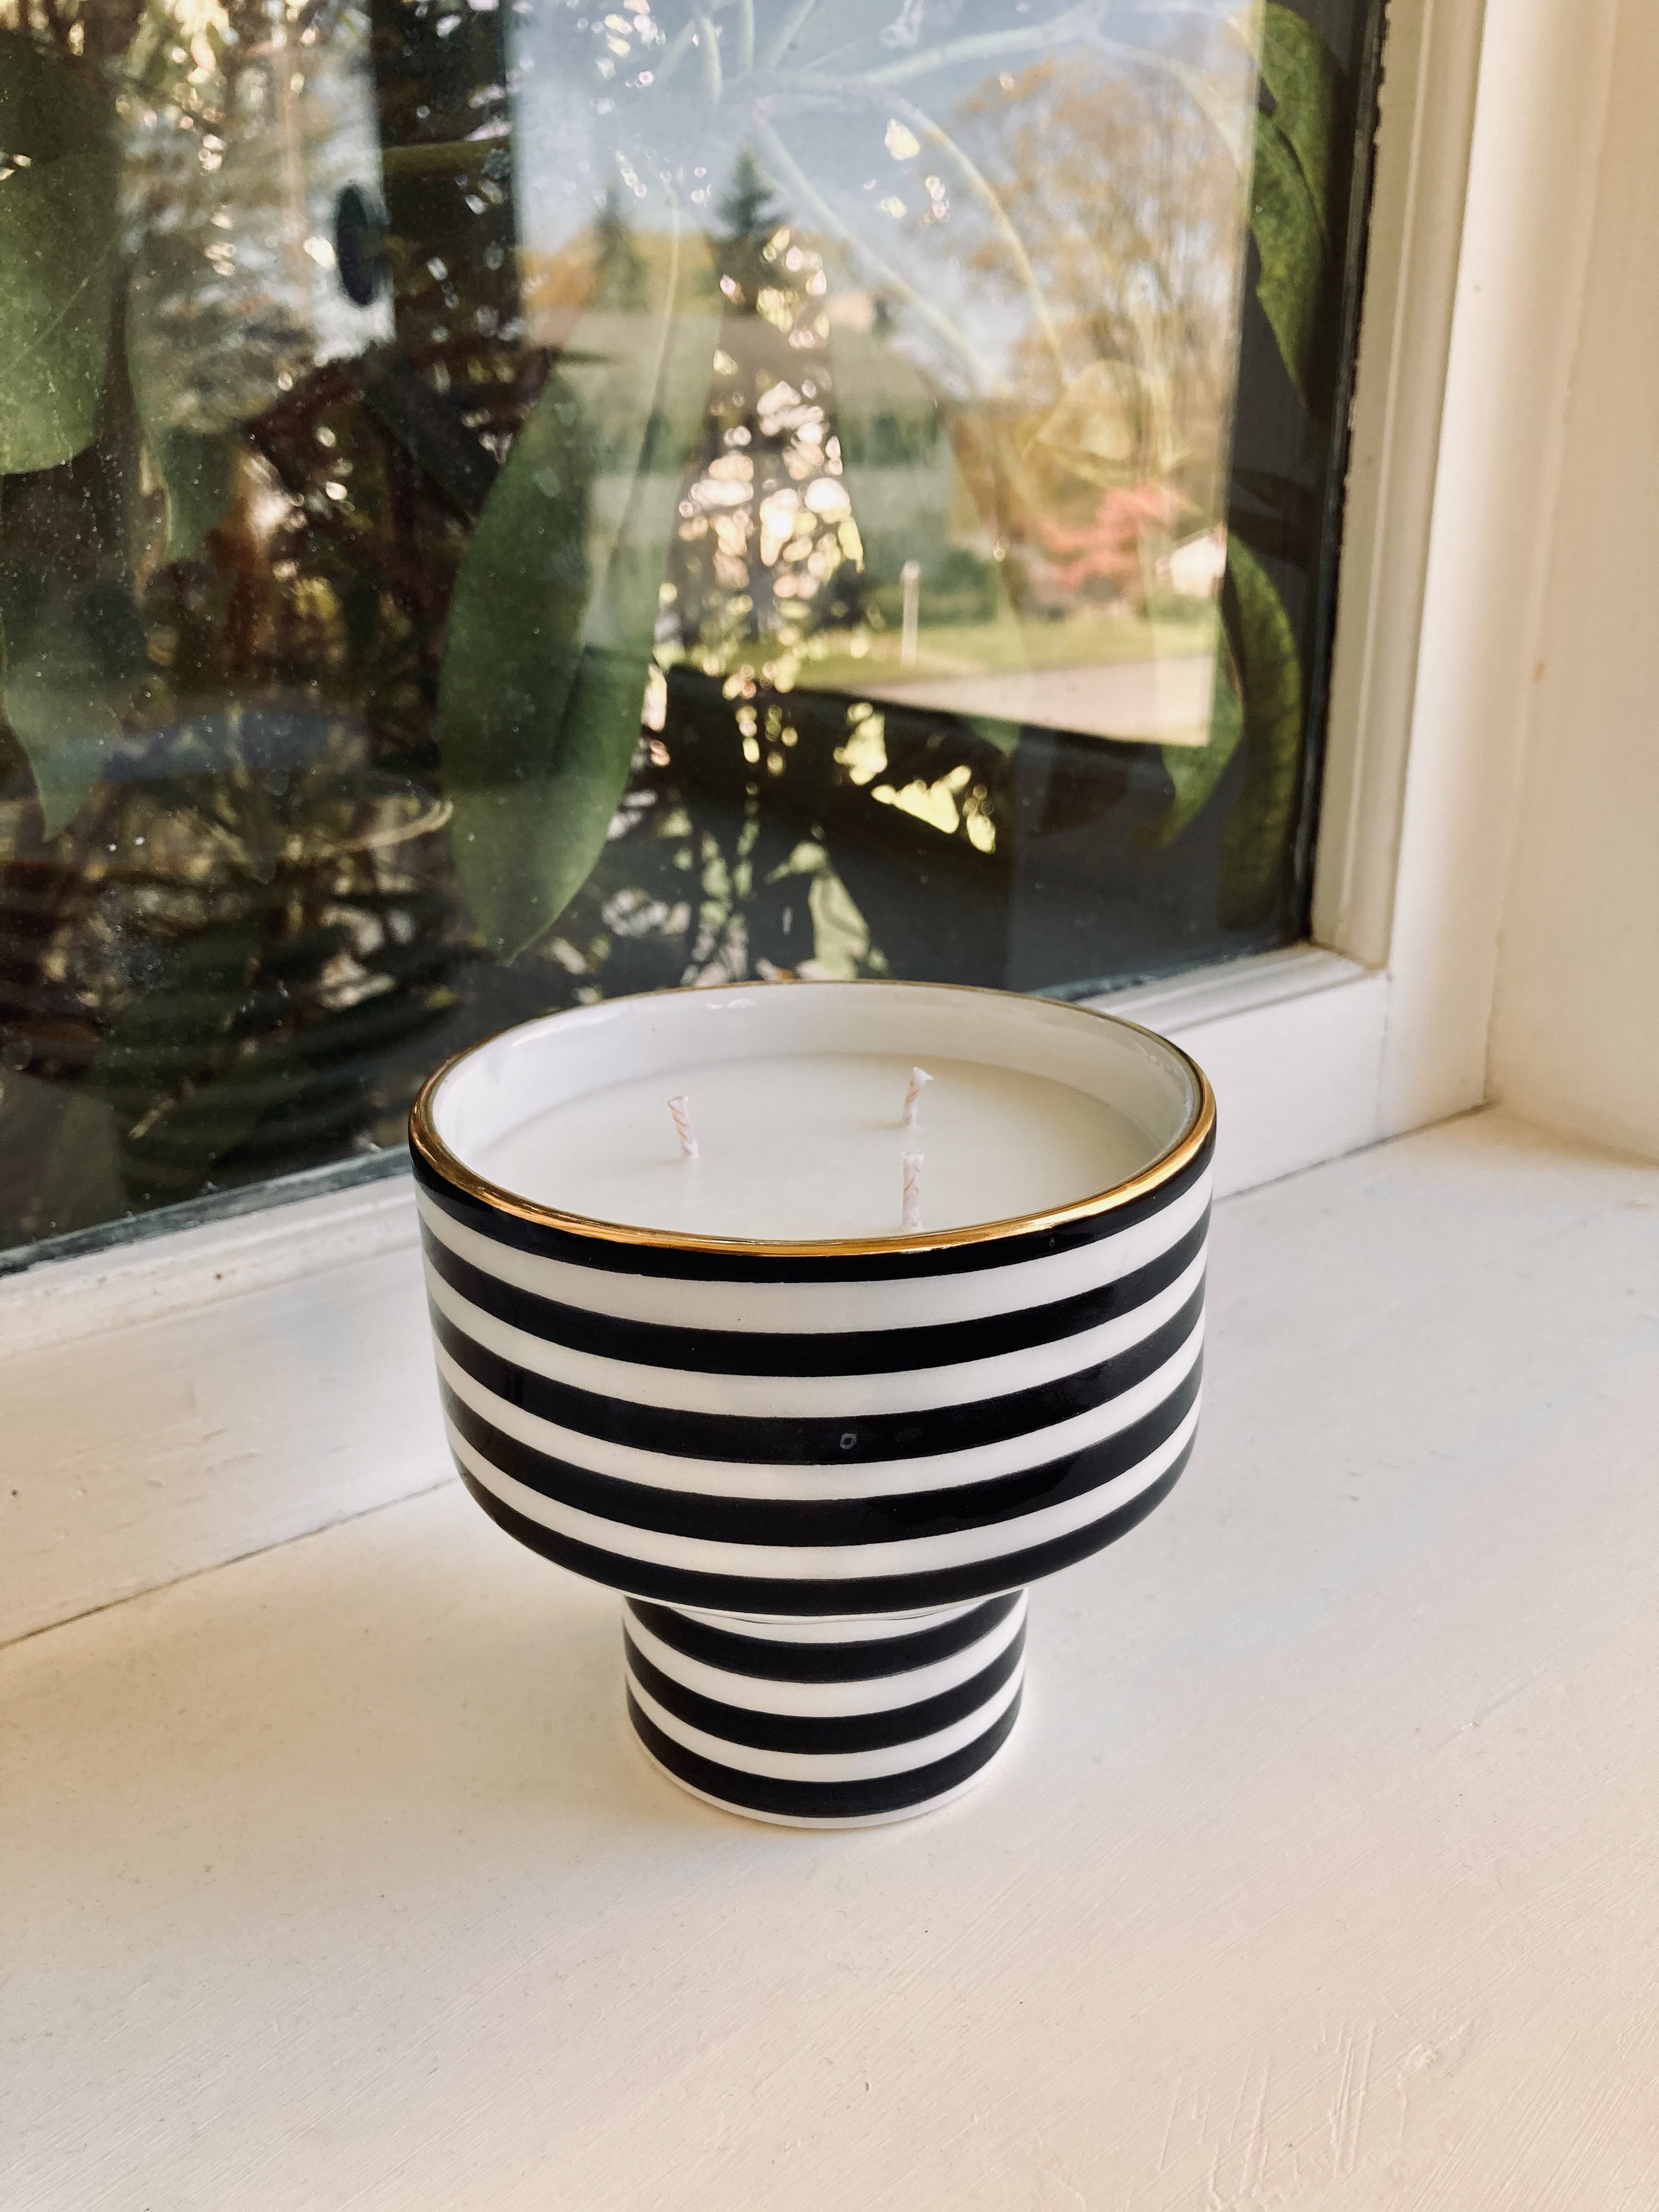 Limited Edition 3-Wick Candle in Chabi-Chic Black and White Stripe Ceramic with 12 Karat Gold